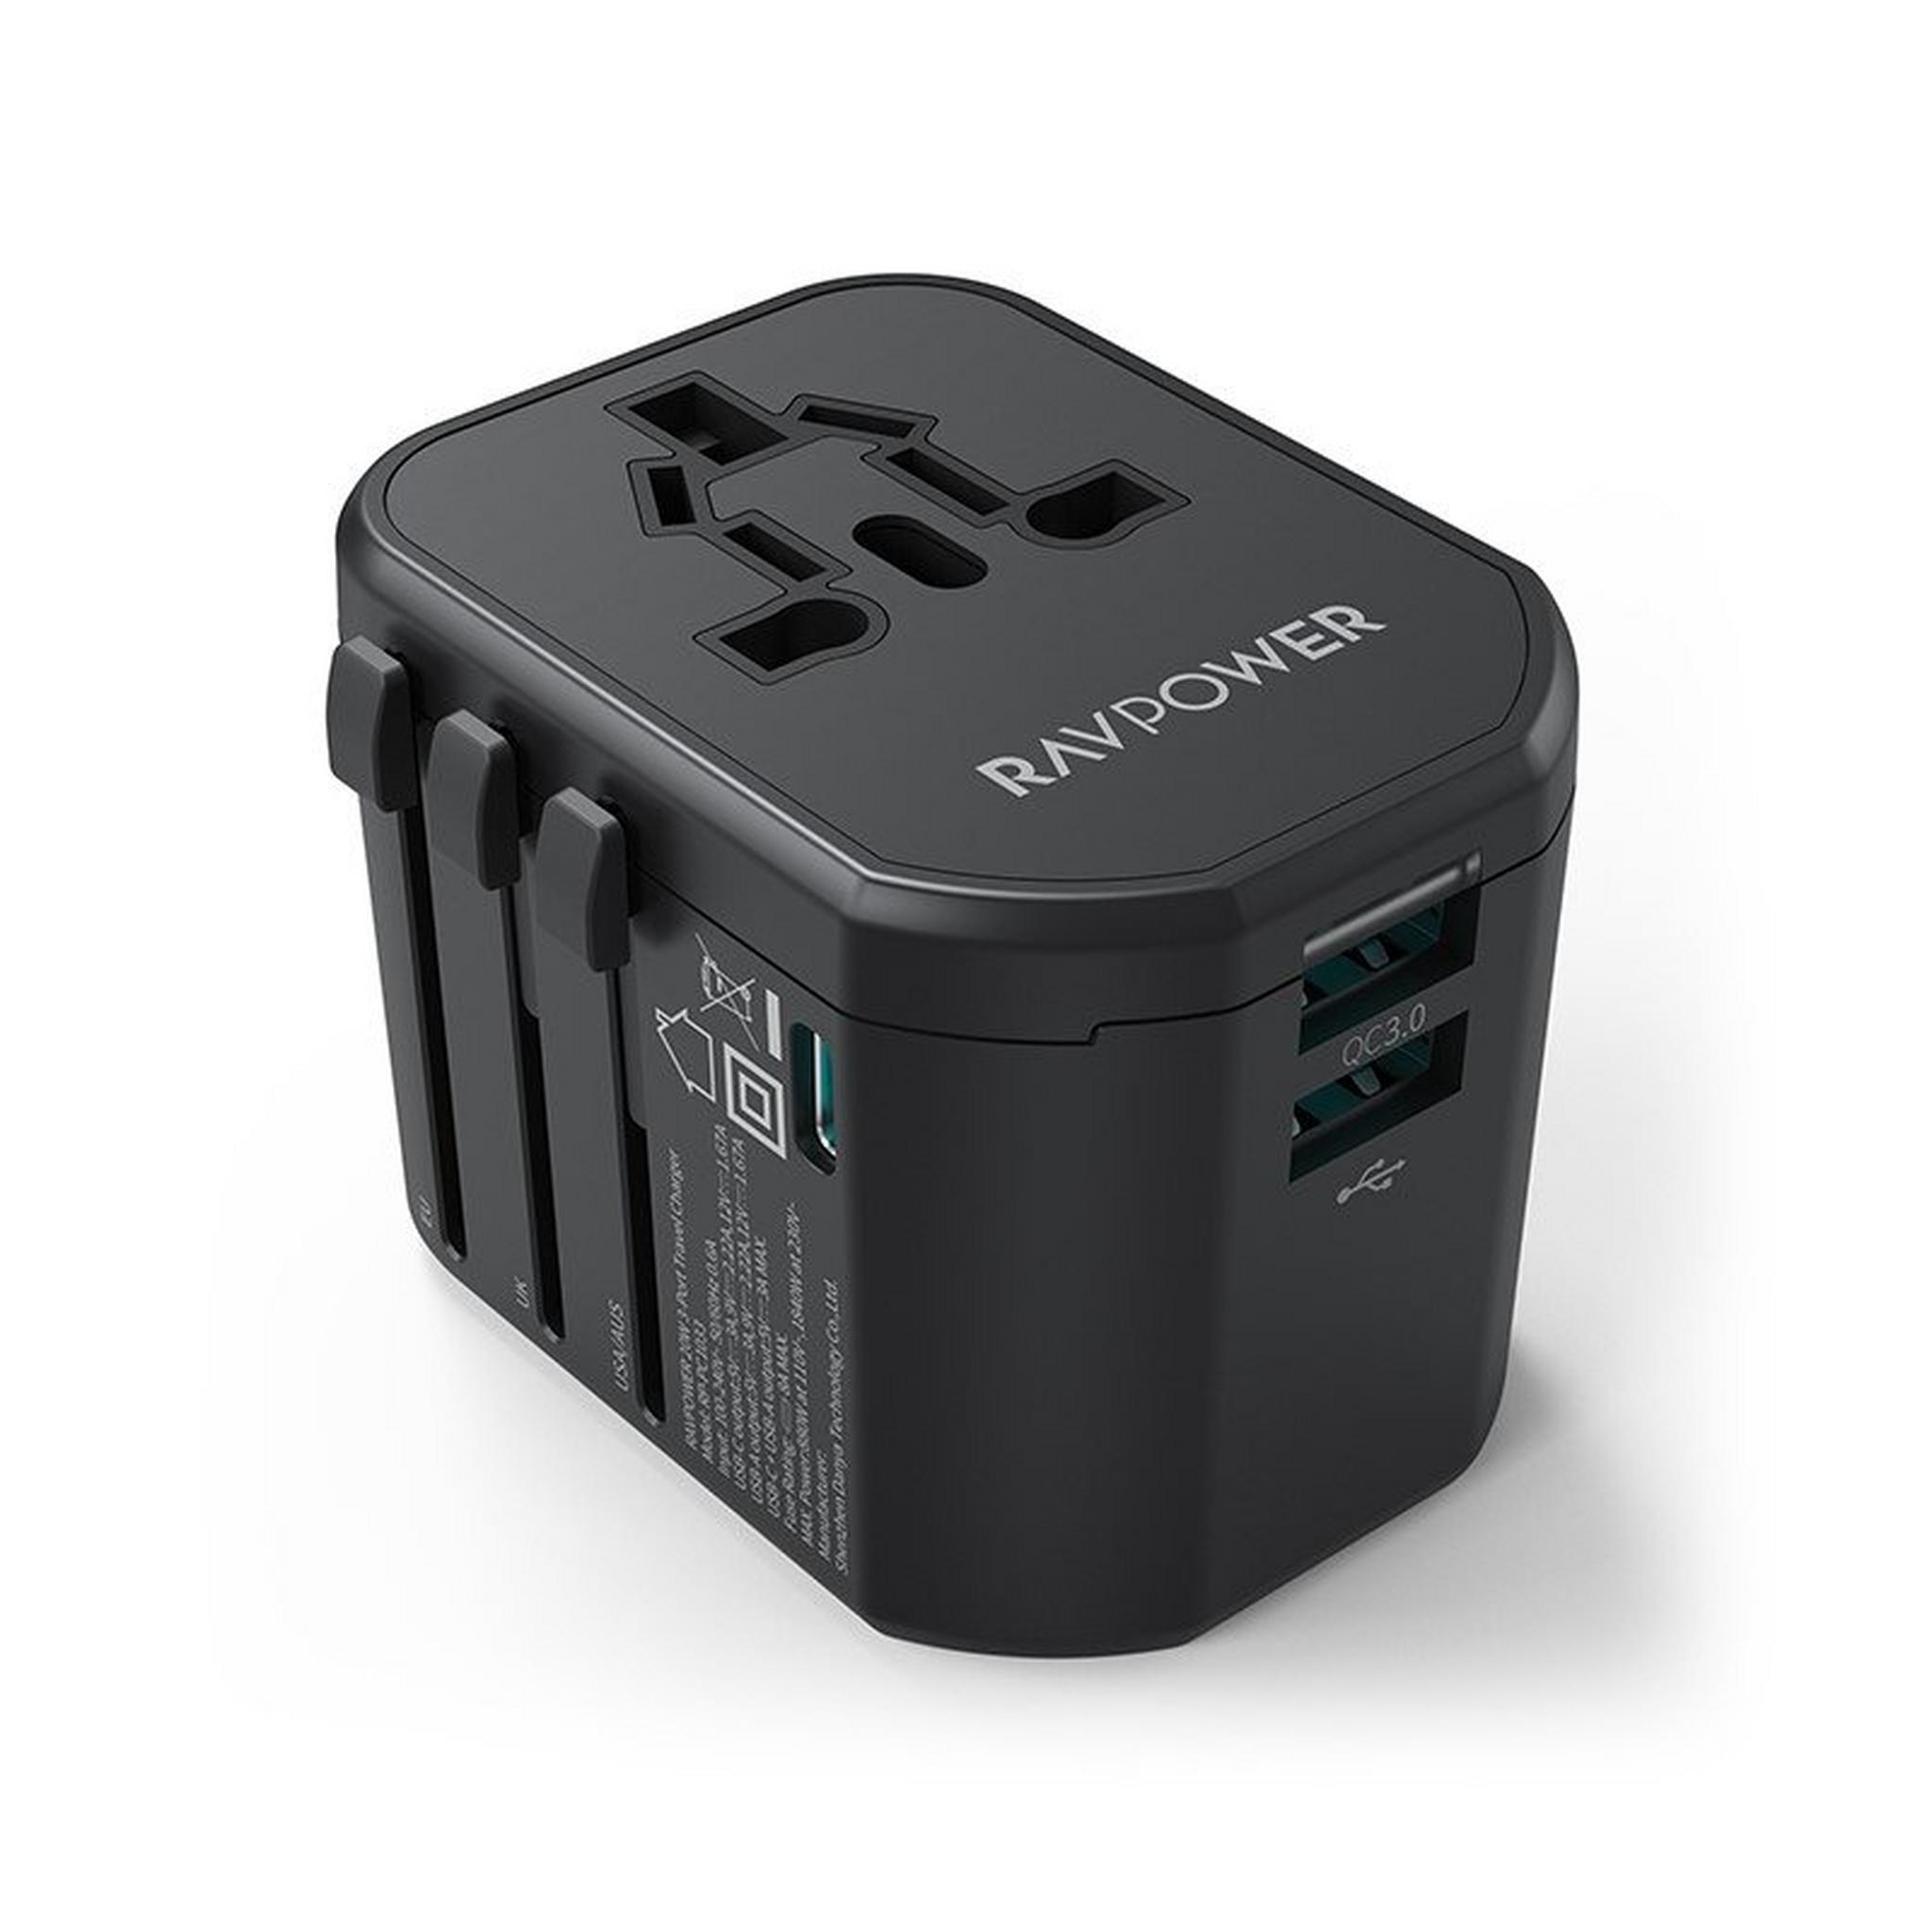 Ravpower (PC1033 Pd) Pioneer, 20 Watts, 3-Port - Travel Charger